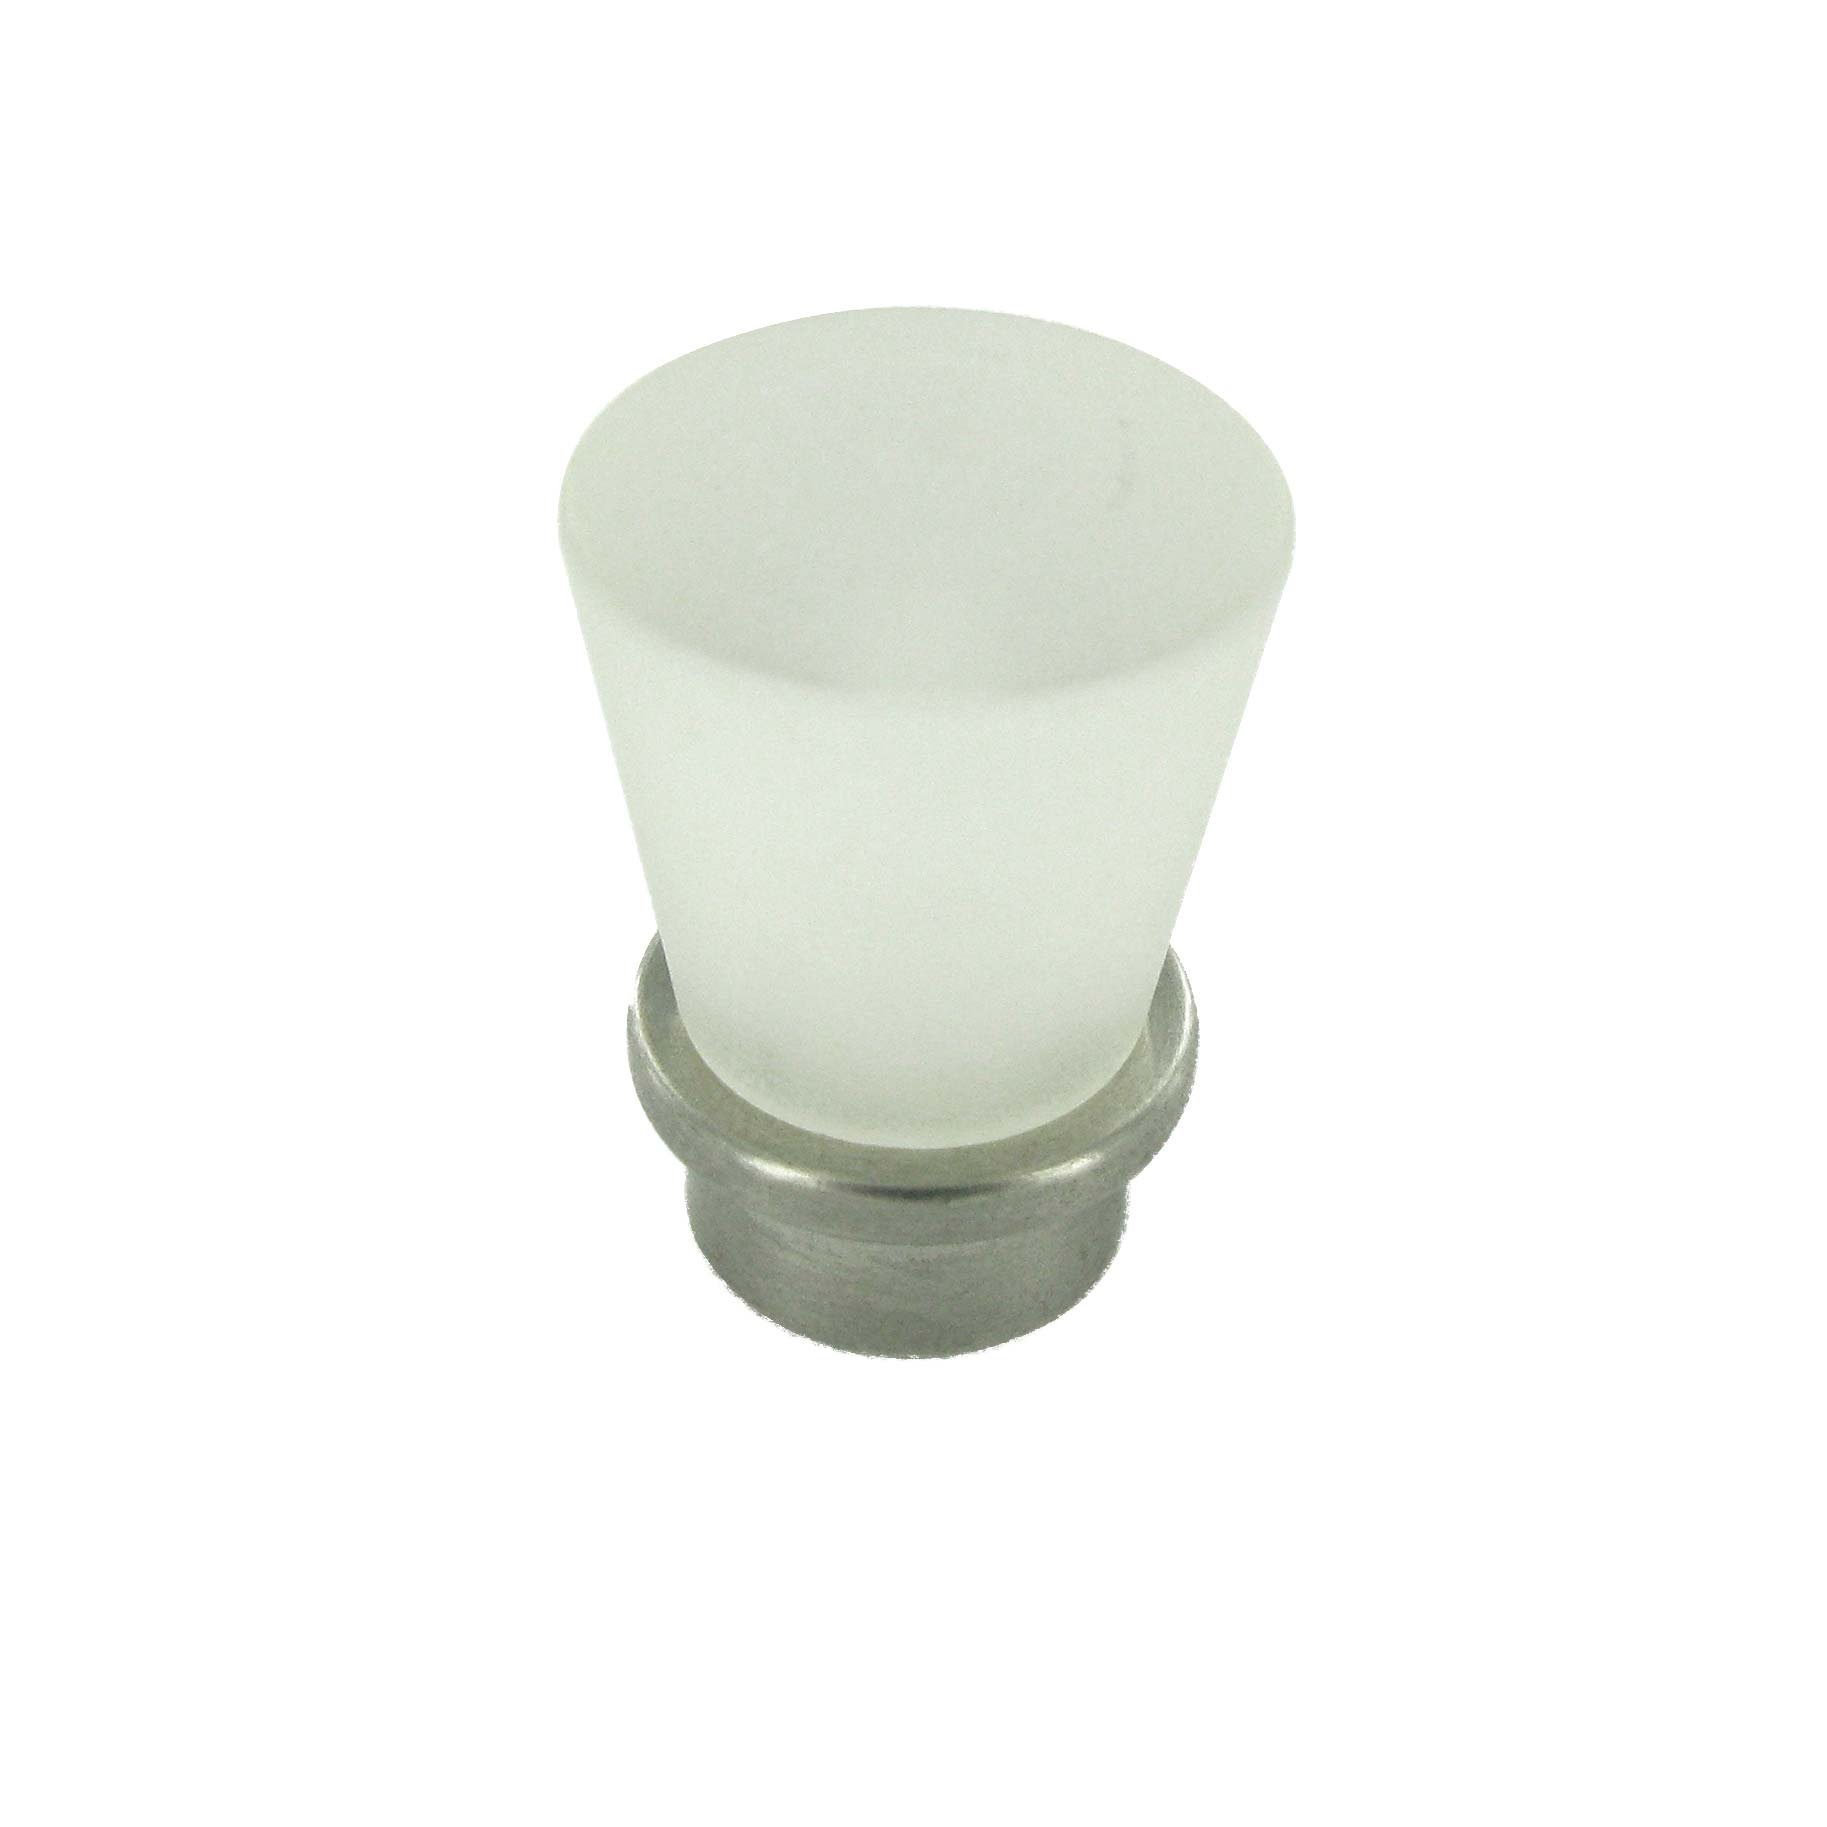 3/4" Diameter Metacryl Knob in Brushed Nickel and Frosted Clear